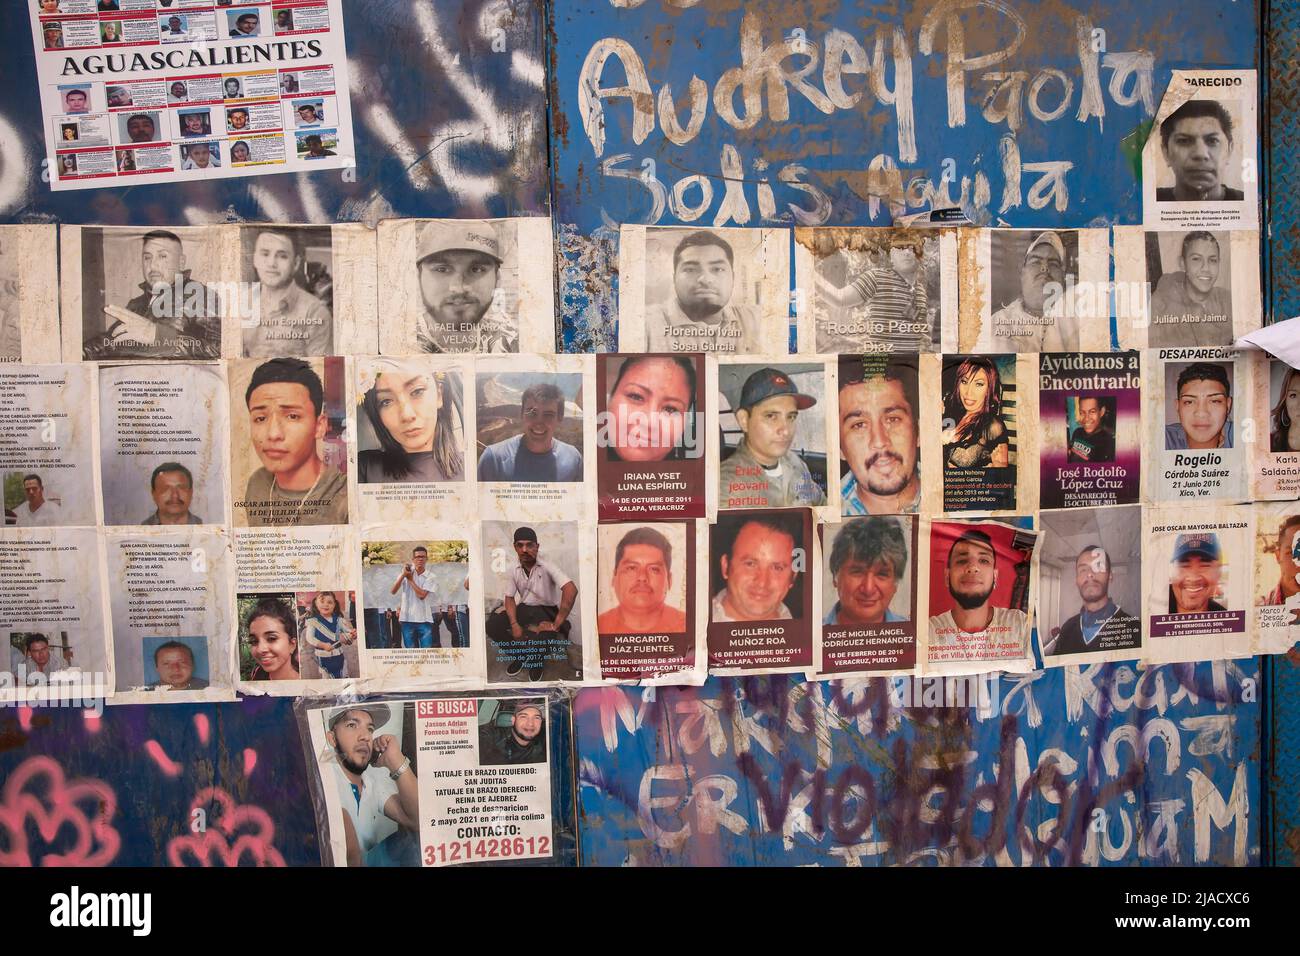 Images of missing people posted on makeshift memorial wall to the Disappeared in Mexico City, Mexico Stock Photo